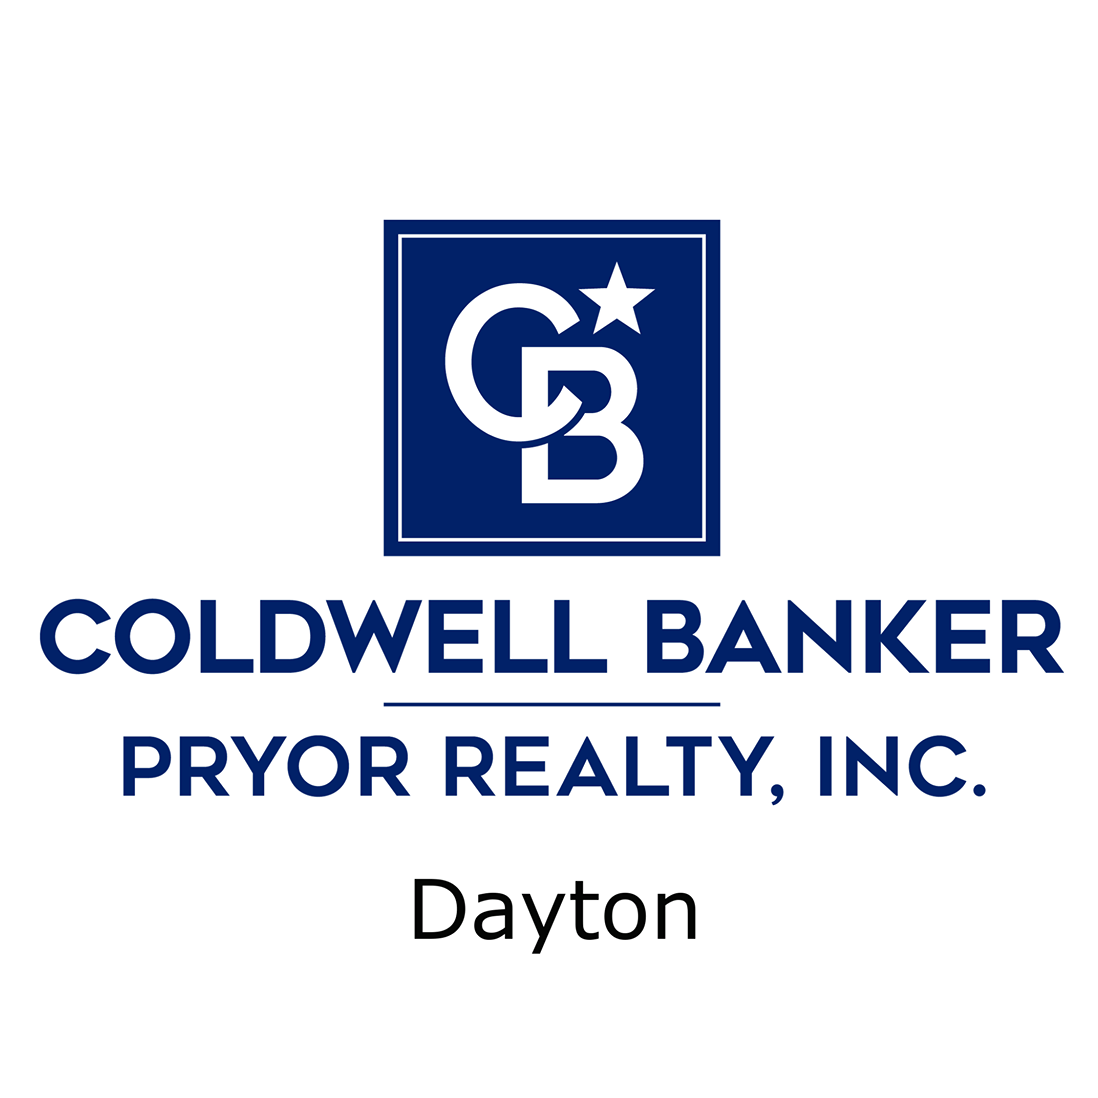 Coldwell Banker Pryor Realty, Inc. 3981 Rhea County Hwy, Dayton Tennessee 37321